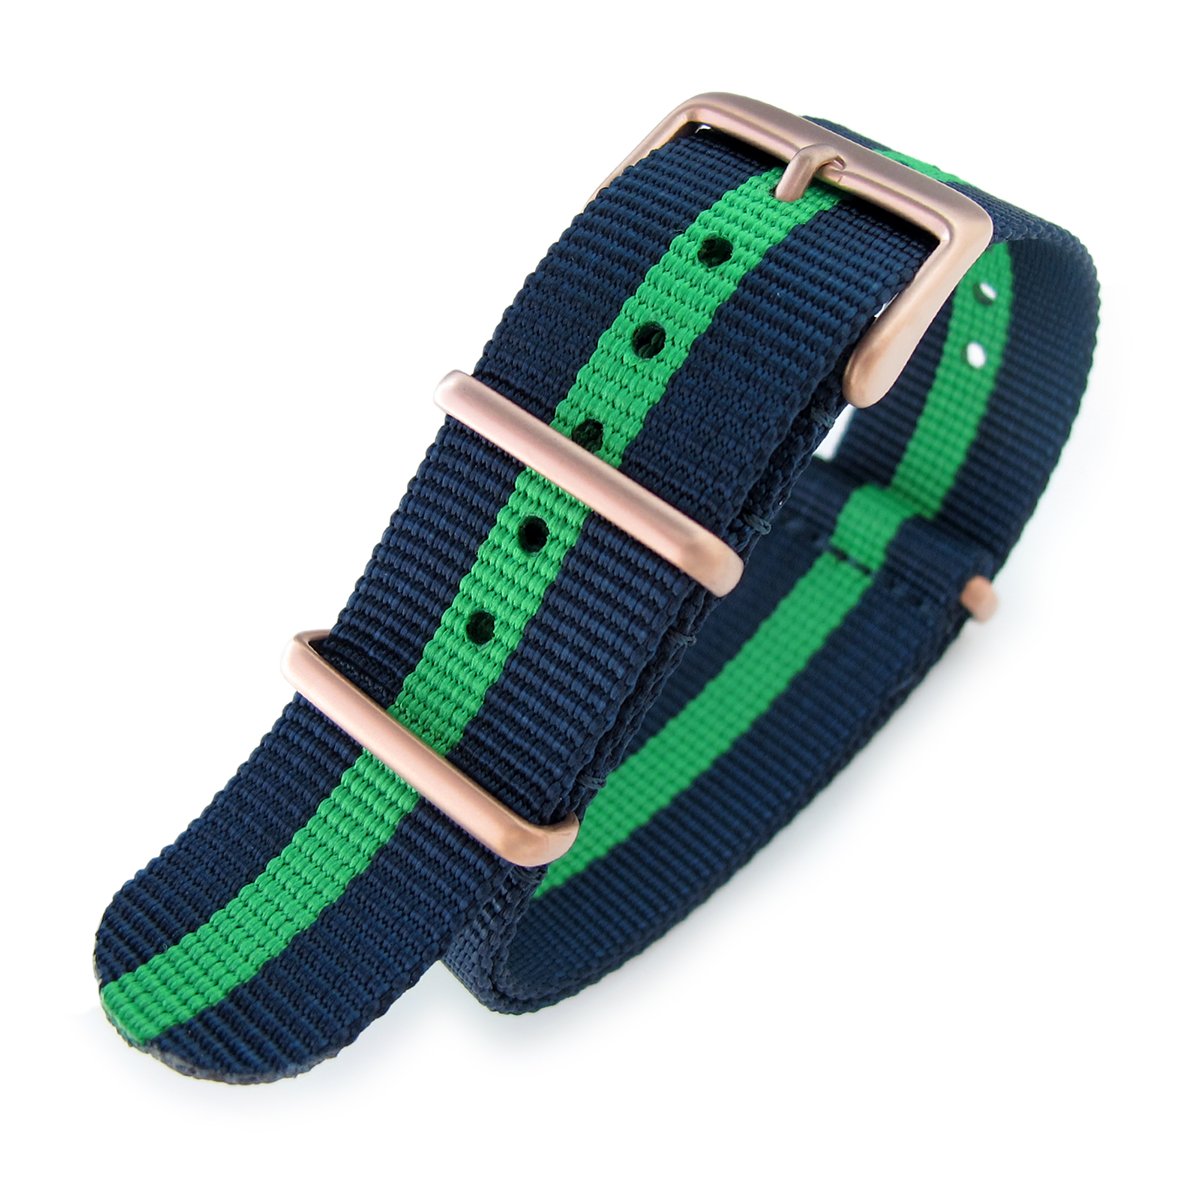 NATO 20mm G10 Military Watch Band Nylon Strap Blue Green Blue IP Champagne 260mm Strapcode Watch Bands